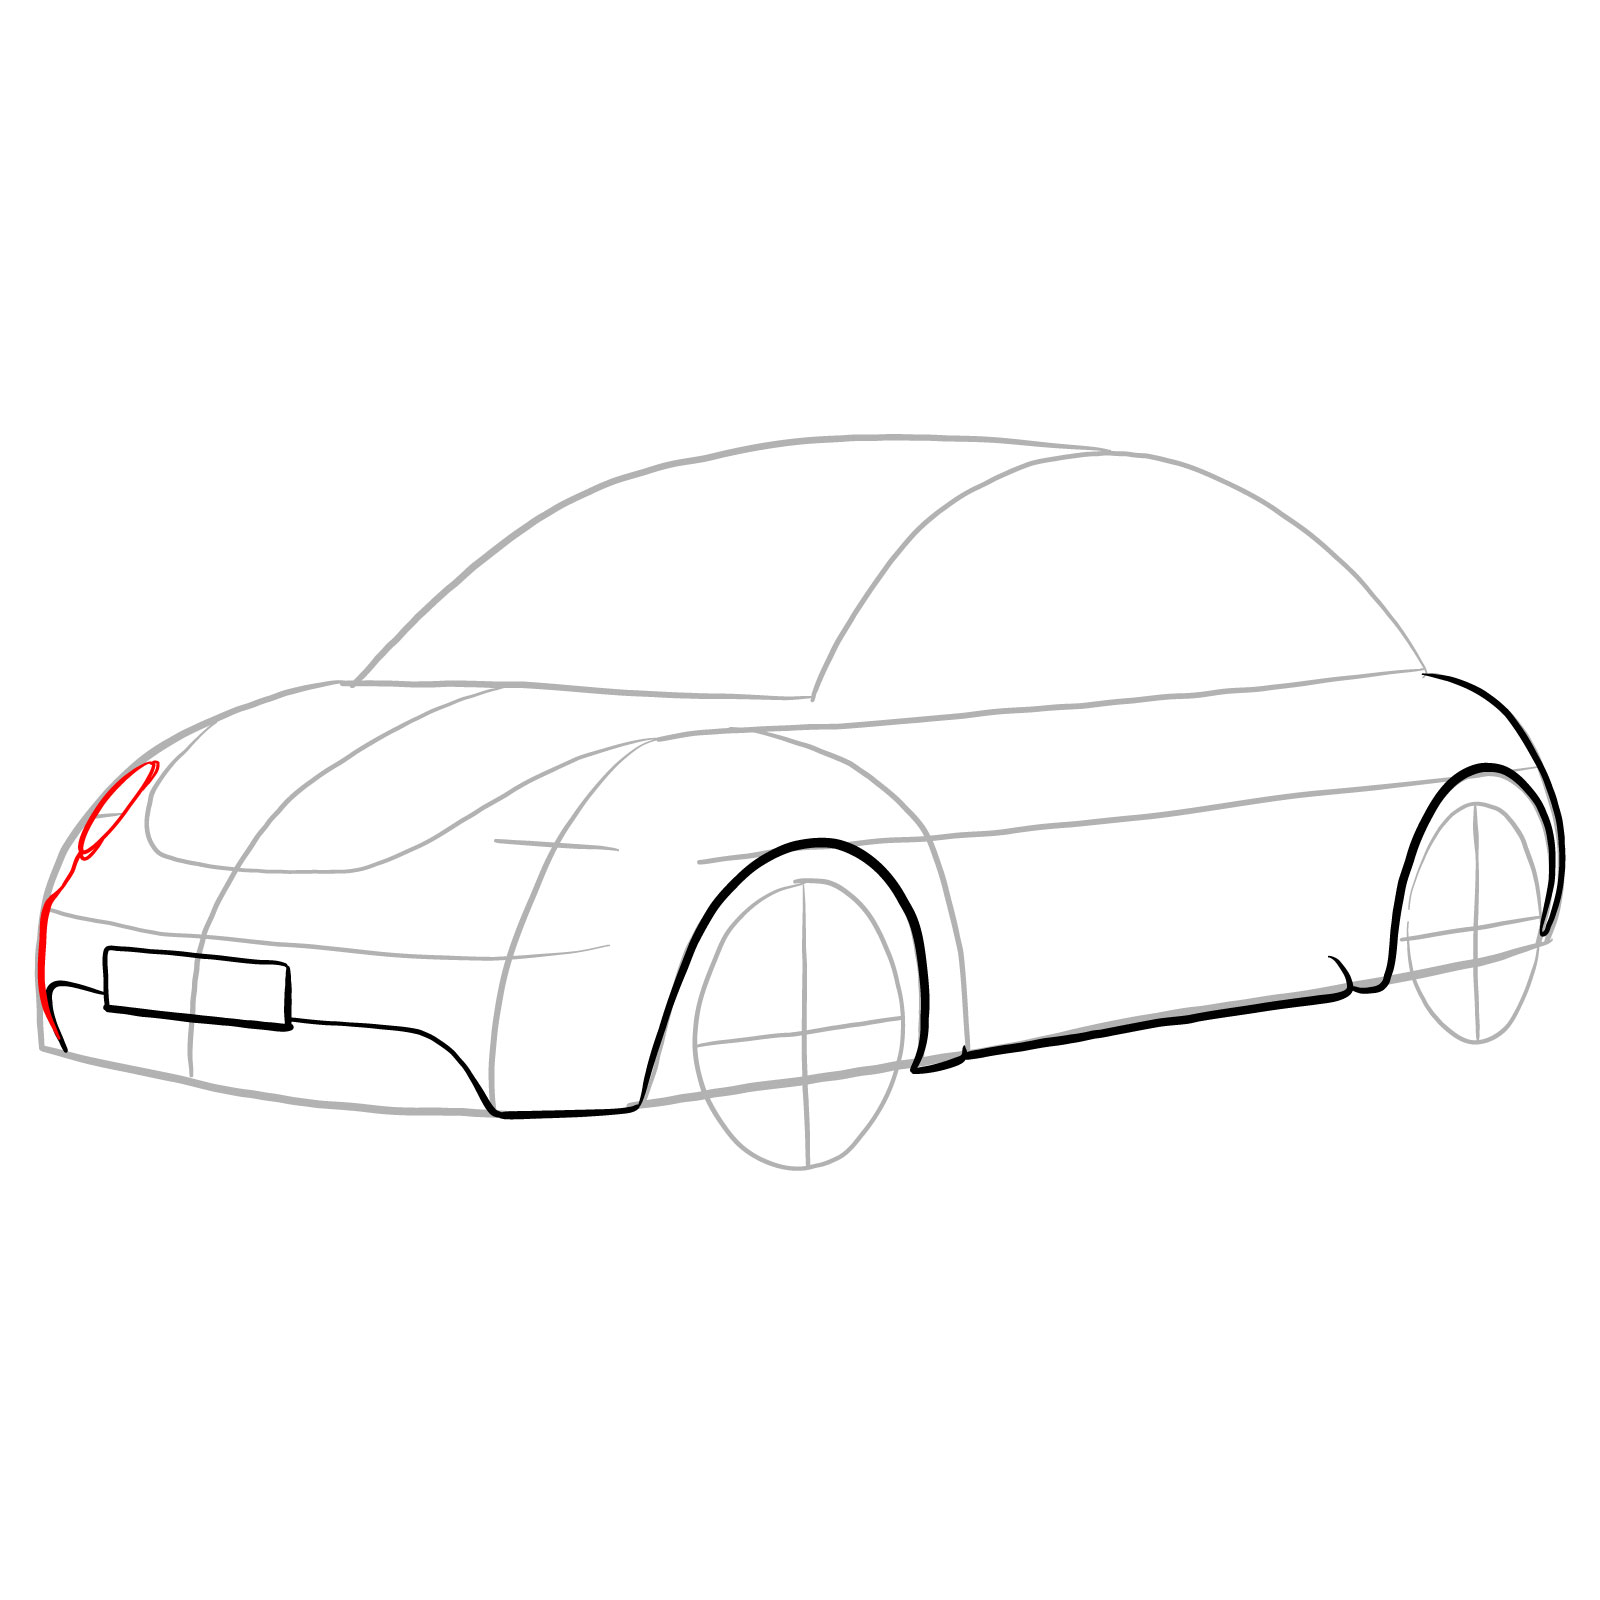 How to draw Volkswagen New Beetle - step 09